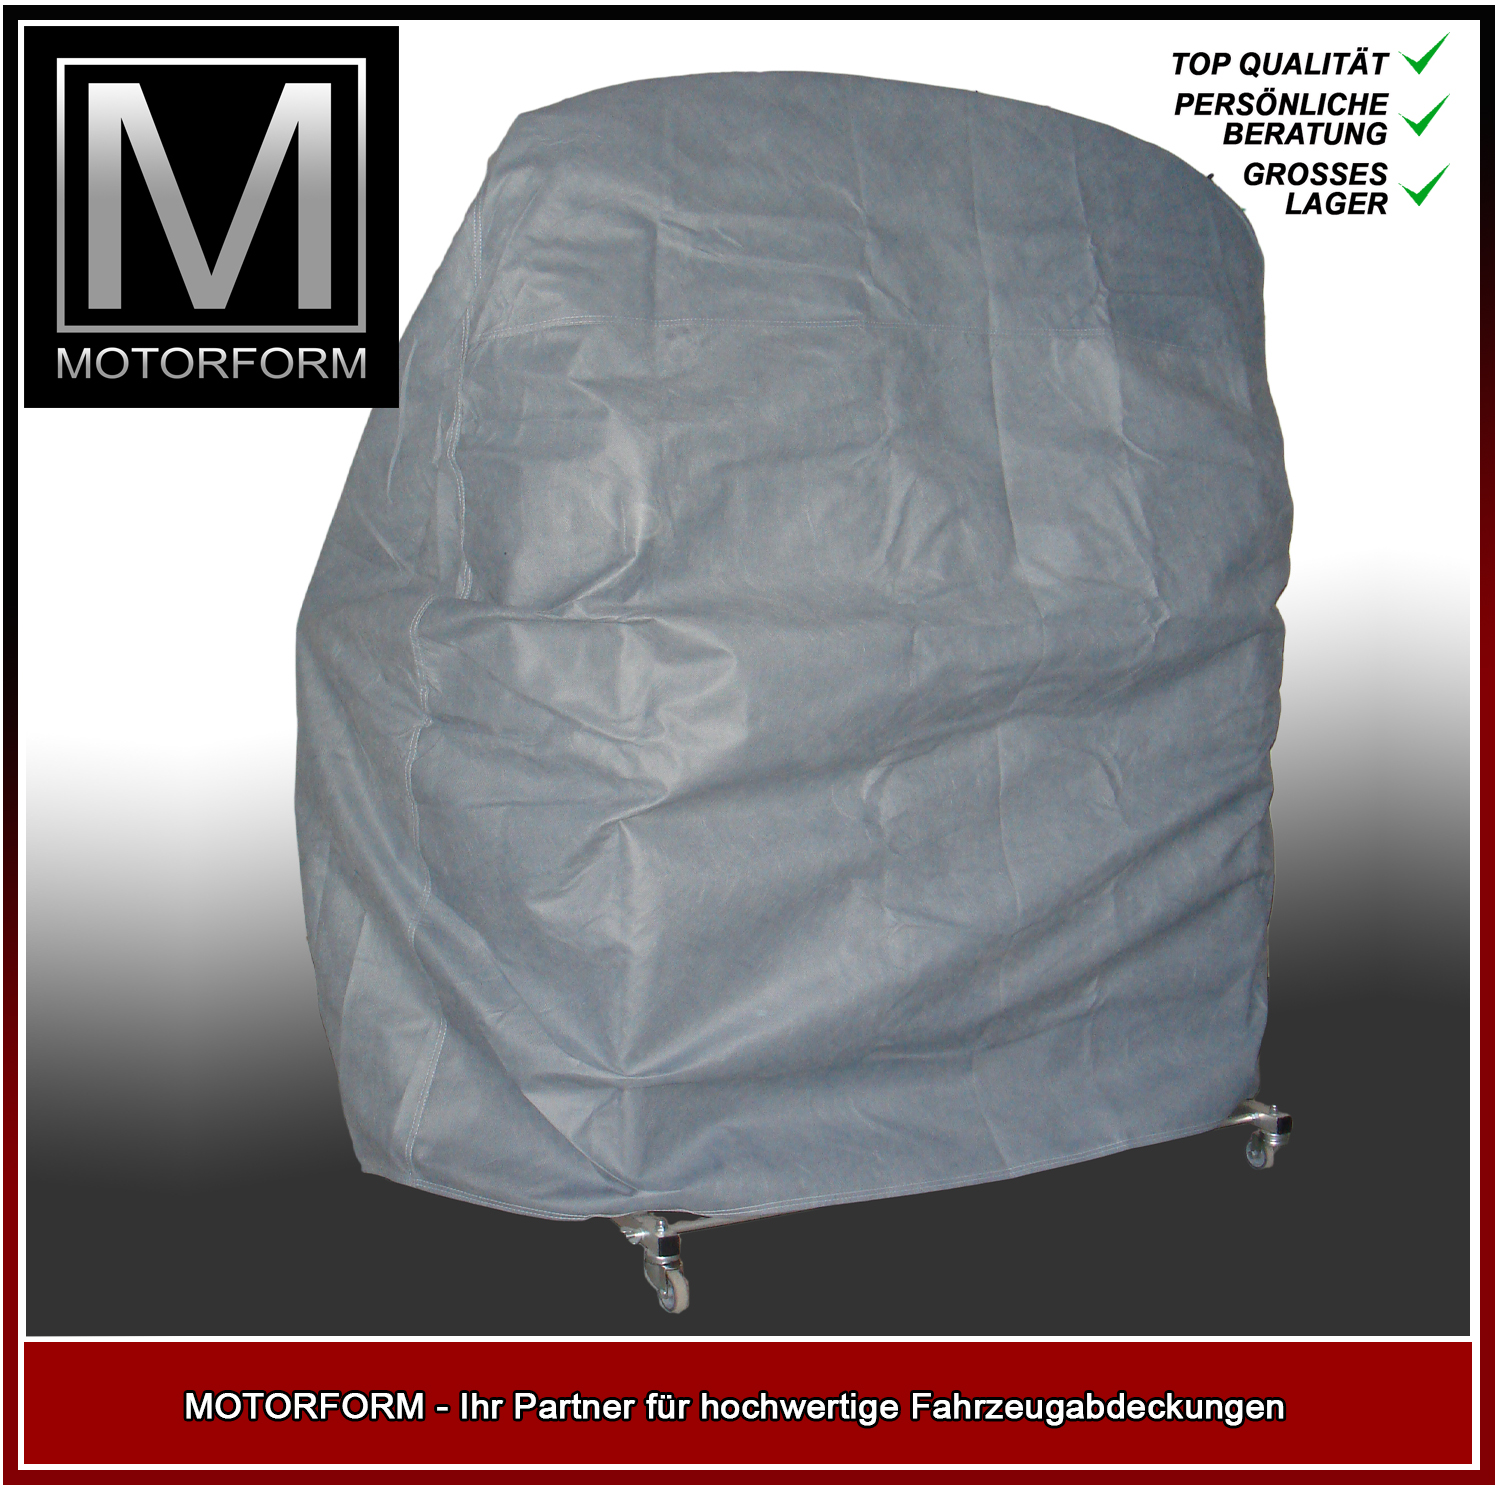 Hardtop-Cover for Hardtop-Cover Mercedes R129 W129